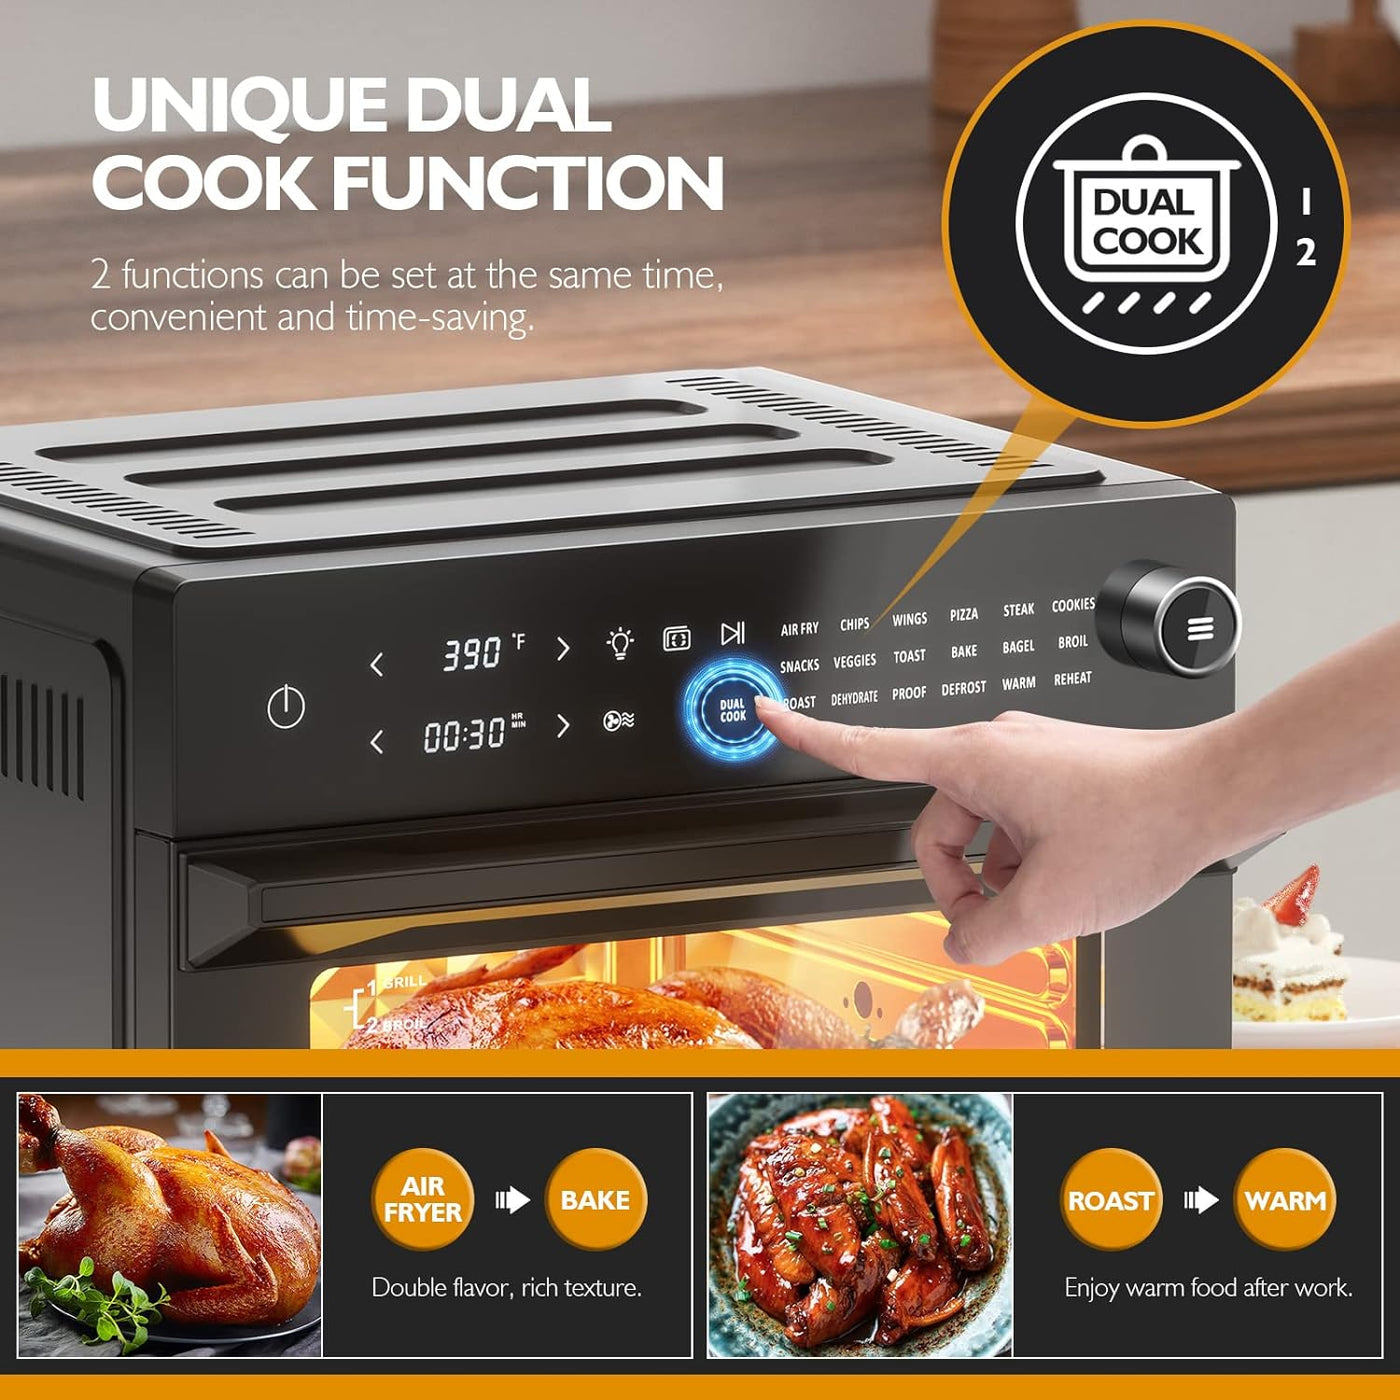 Air Fryer Toaster Oven Combo 12 Functions Smart 30L Large